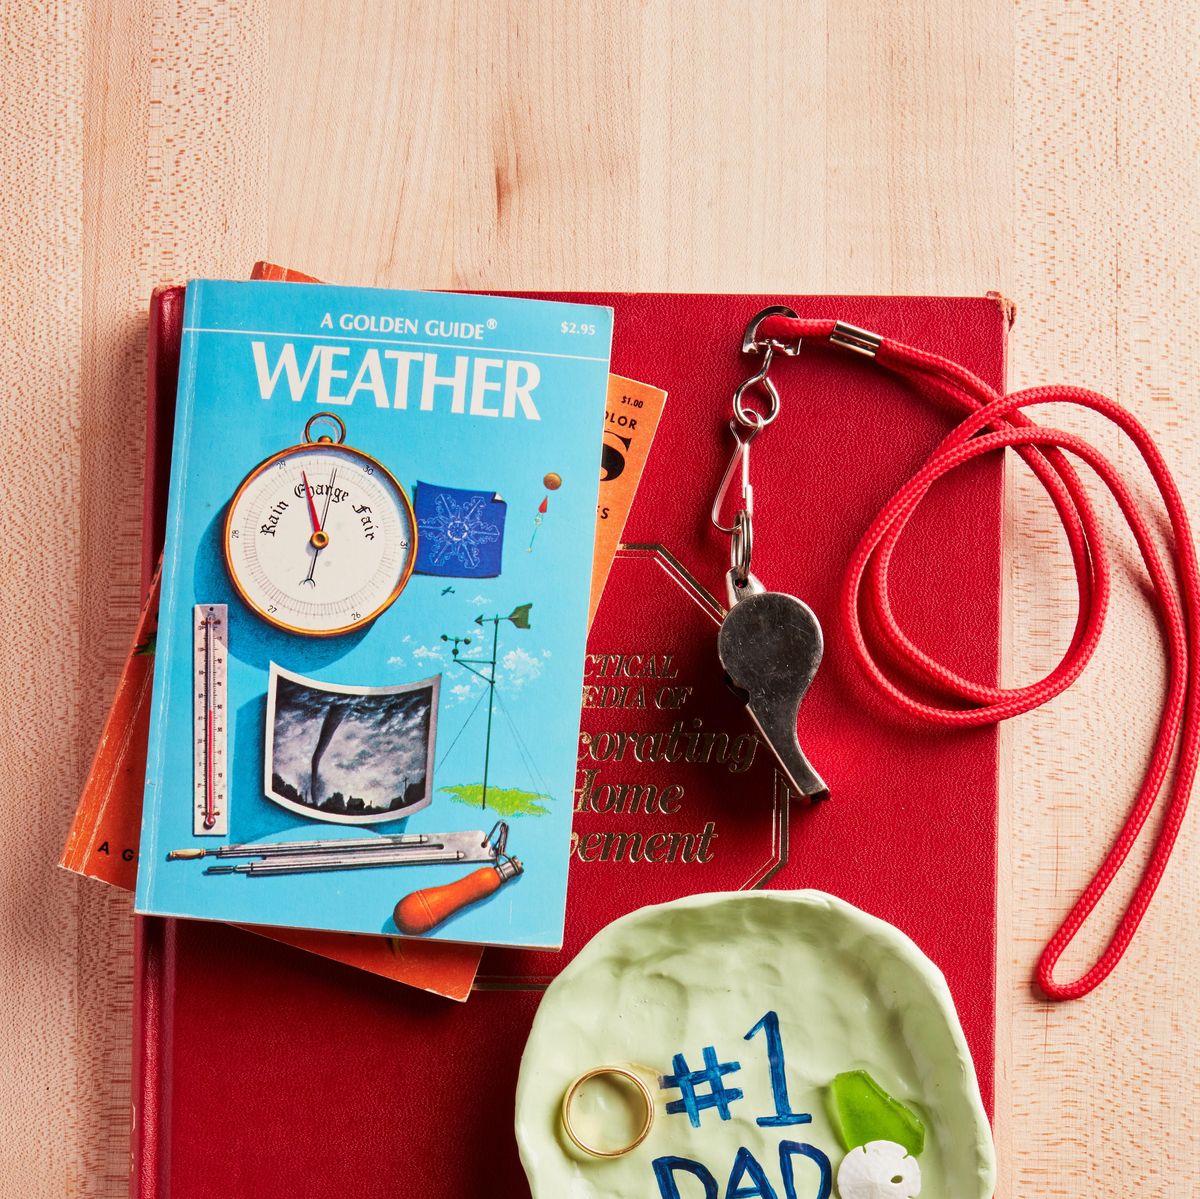 30 Easy Father's Day Crafts — DIY Gifts Kids Can Make for Dad